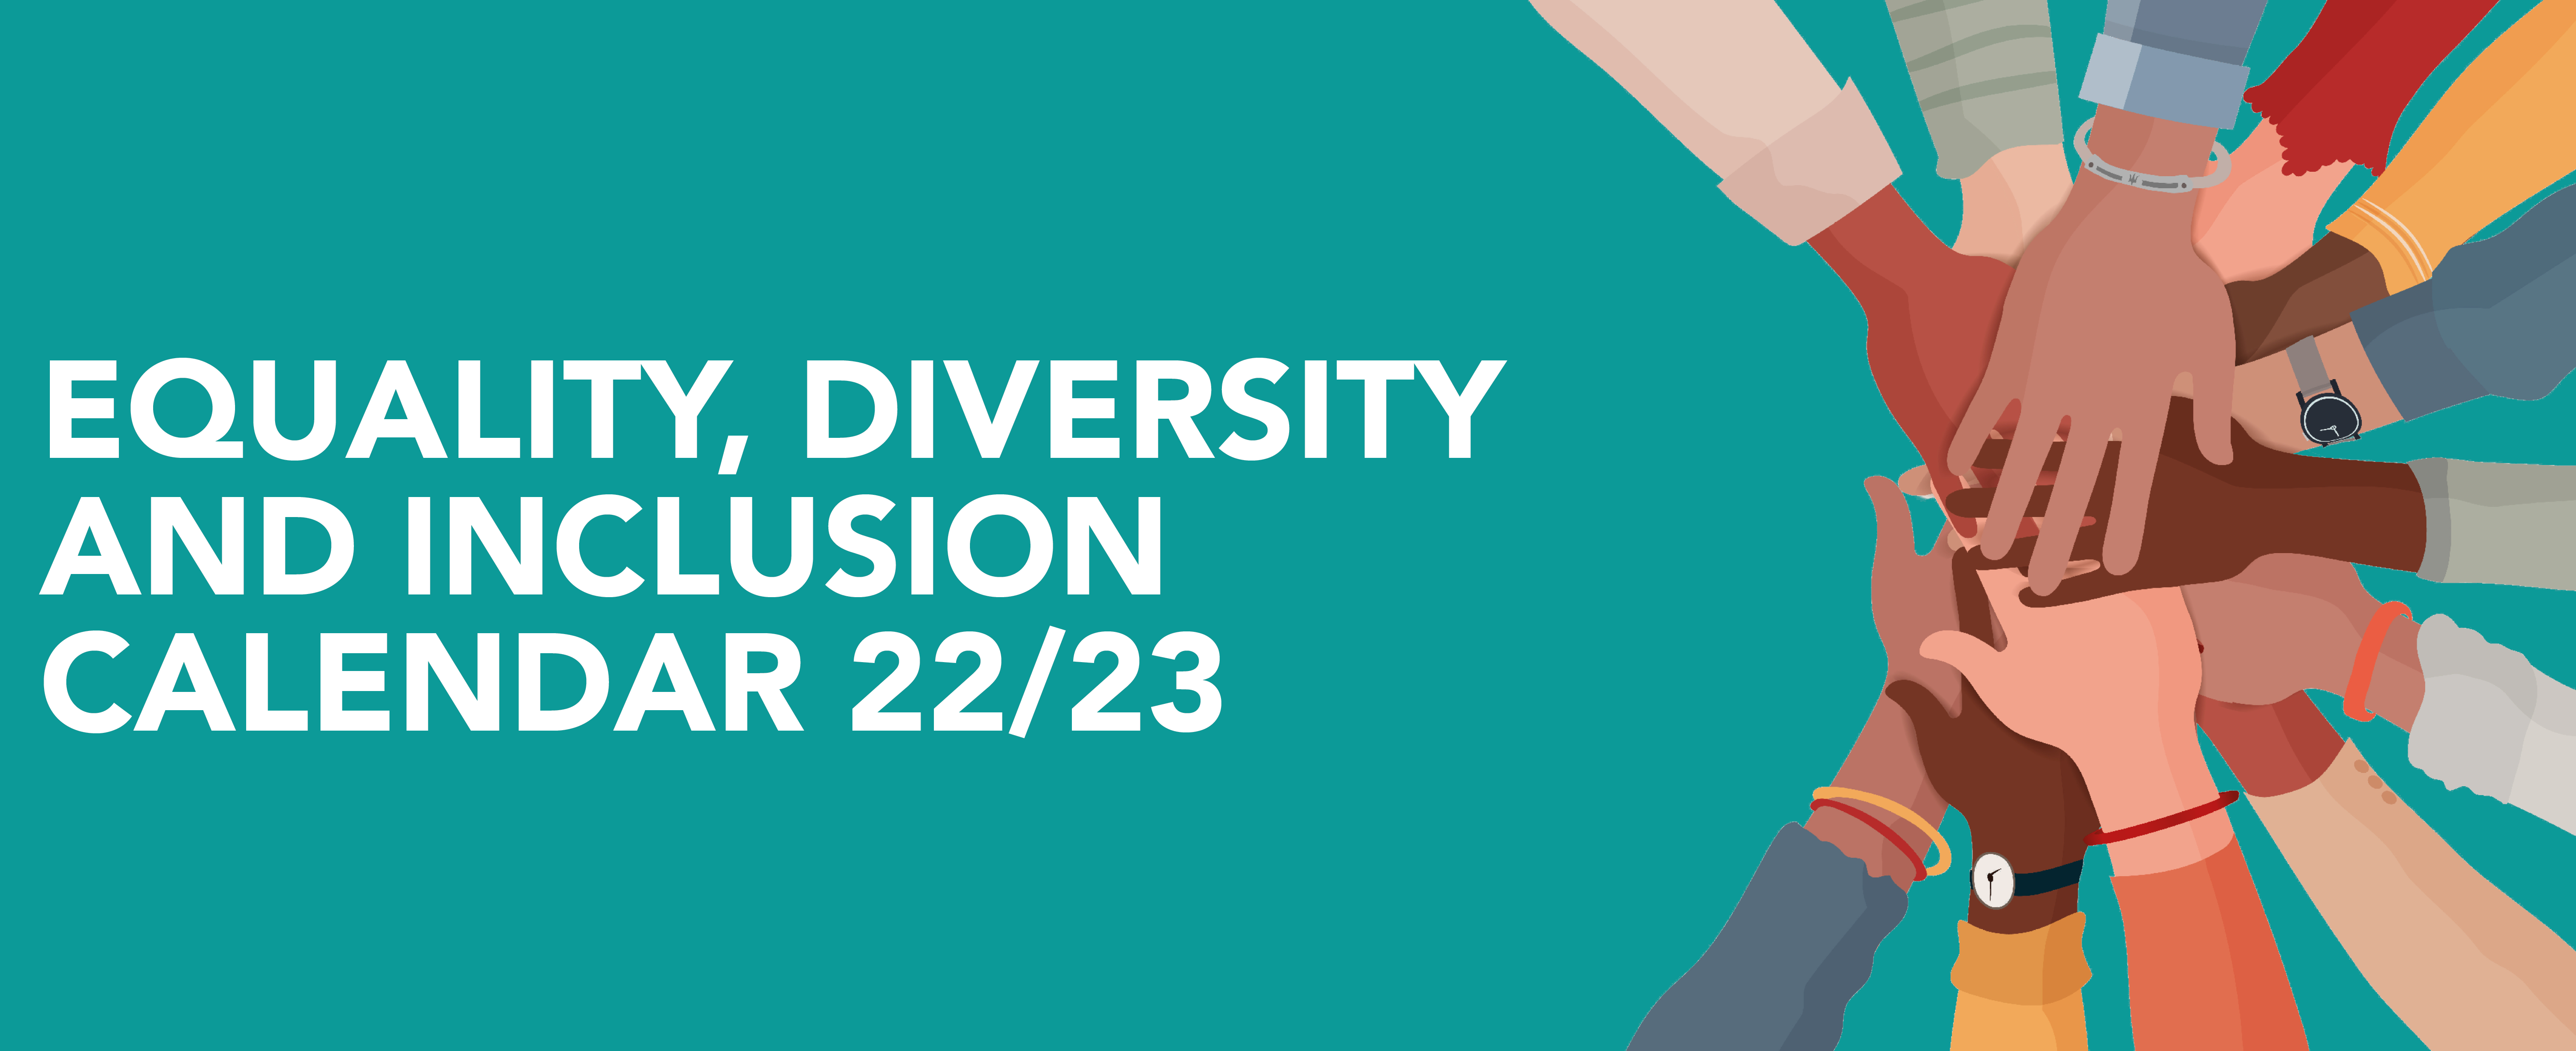 Equality, diversity and inclusion calendar 22/23